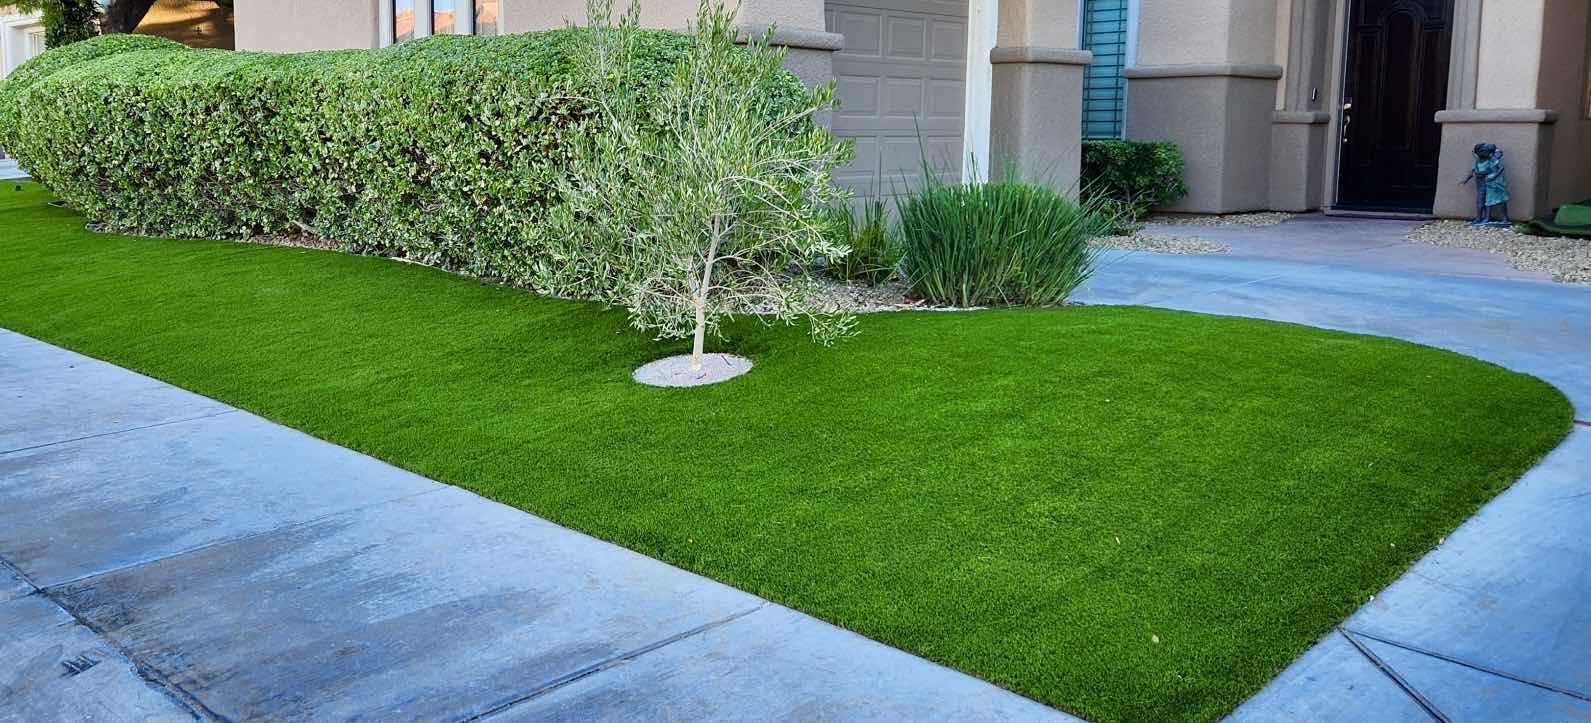 Photo 1 of SUPREME PREMIUM QUALITY ARTIFICIAL TURF GRASS 15’ X 100’ (1500 TOTAL SQ FT) ANTHEM COUNTRY CLUB APPROVED TOTAL TURF HEIGHT 1.97” (Pickup Sun June 2nd & Mon June 3rd)